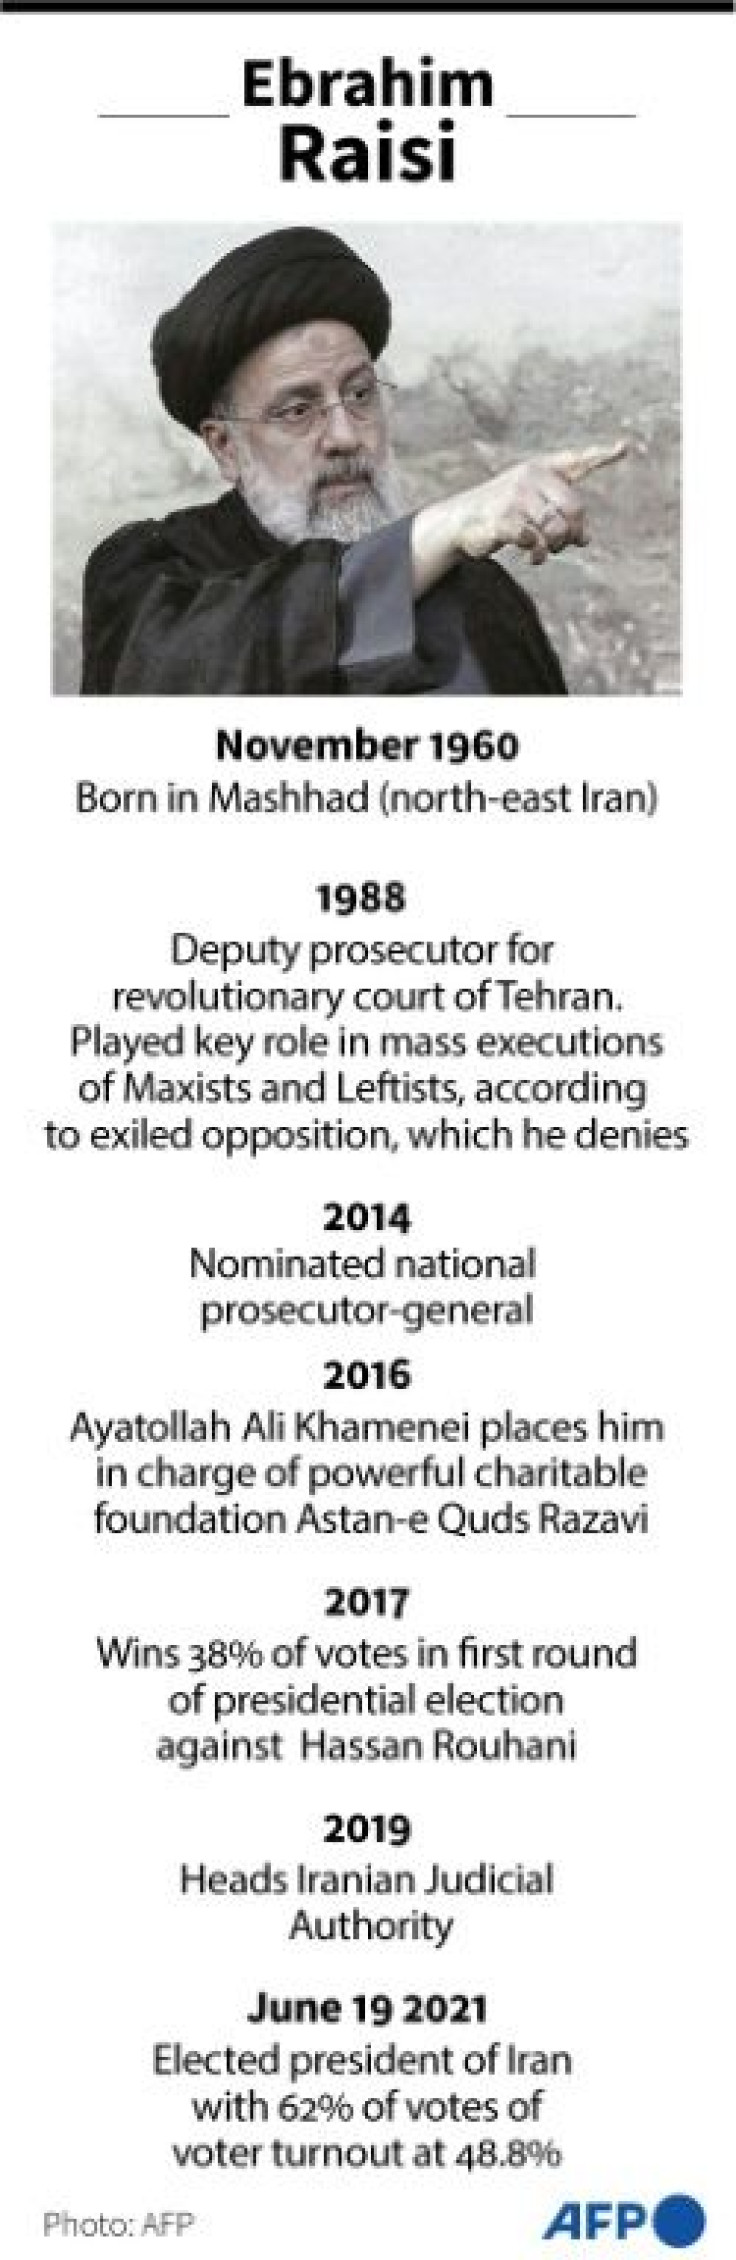 Profile of Iran's President-elect Ebrahim Raisi, who will be inaugurated on Tuesday, August 3.